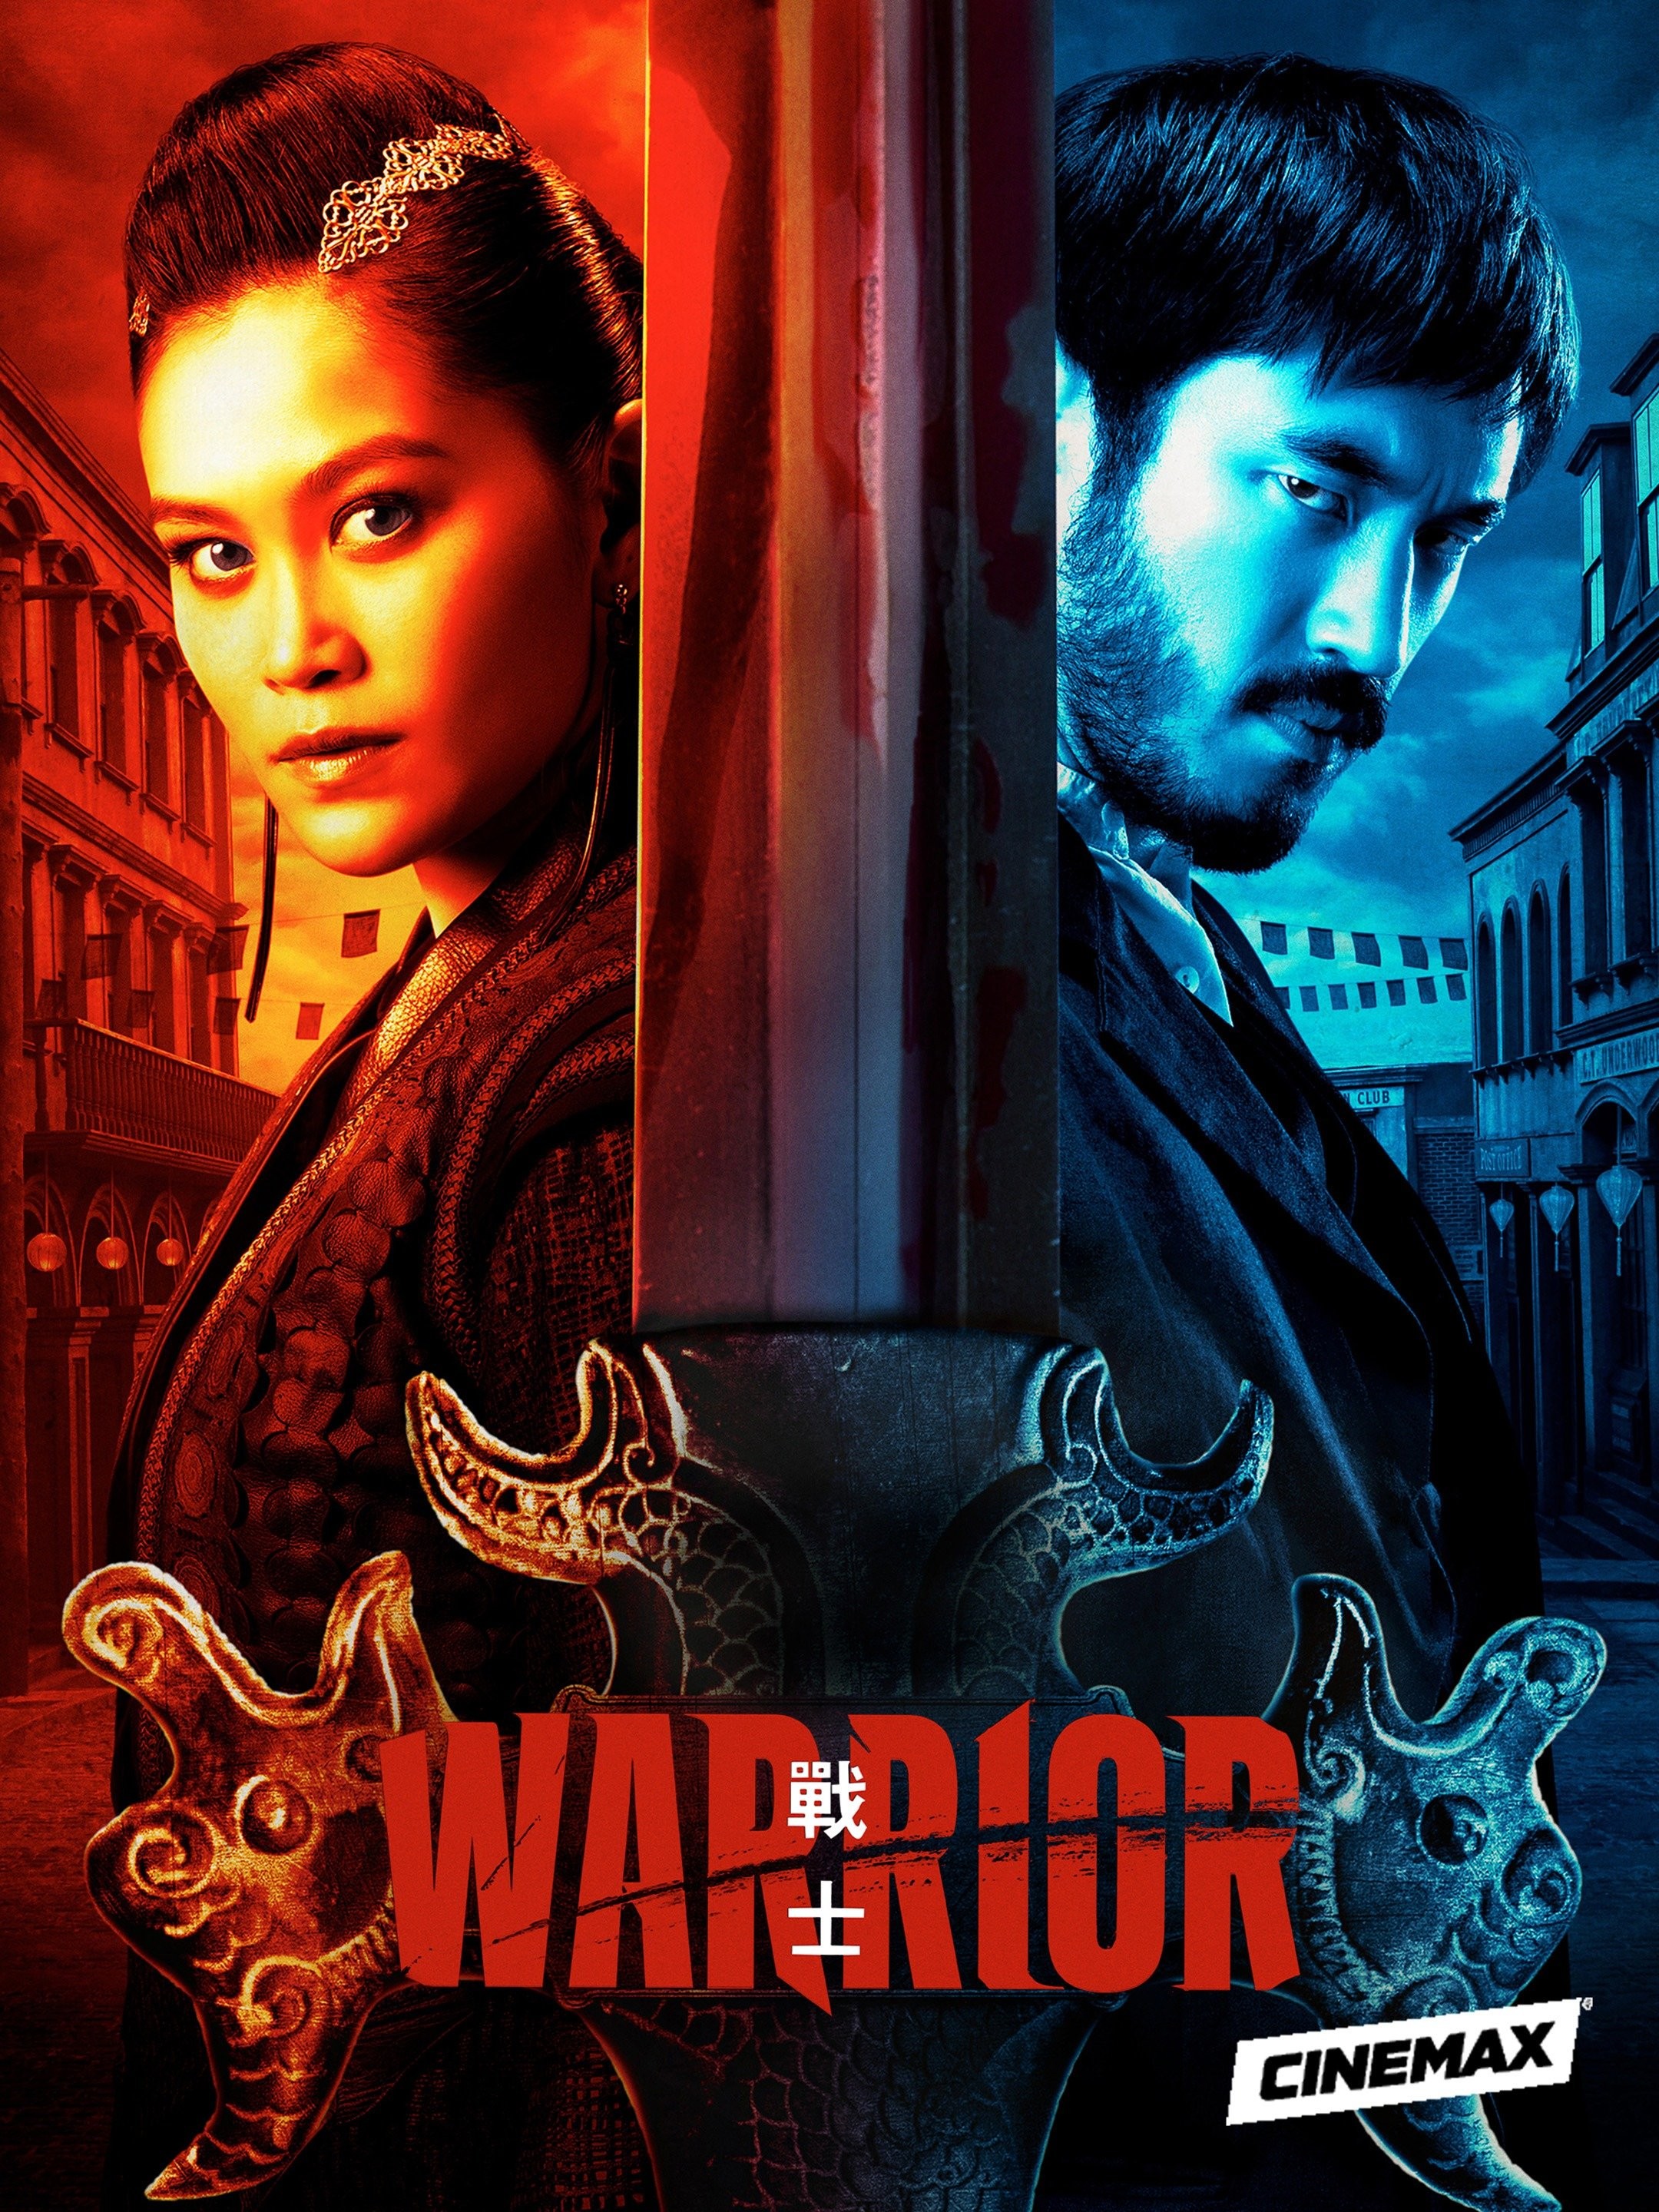 Warrior Season 2 Episode 8 Review: All Enemies, Foreign and